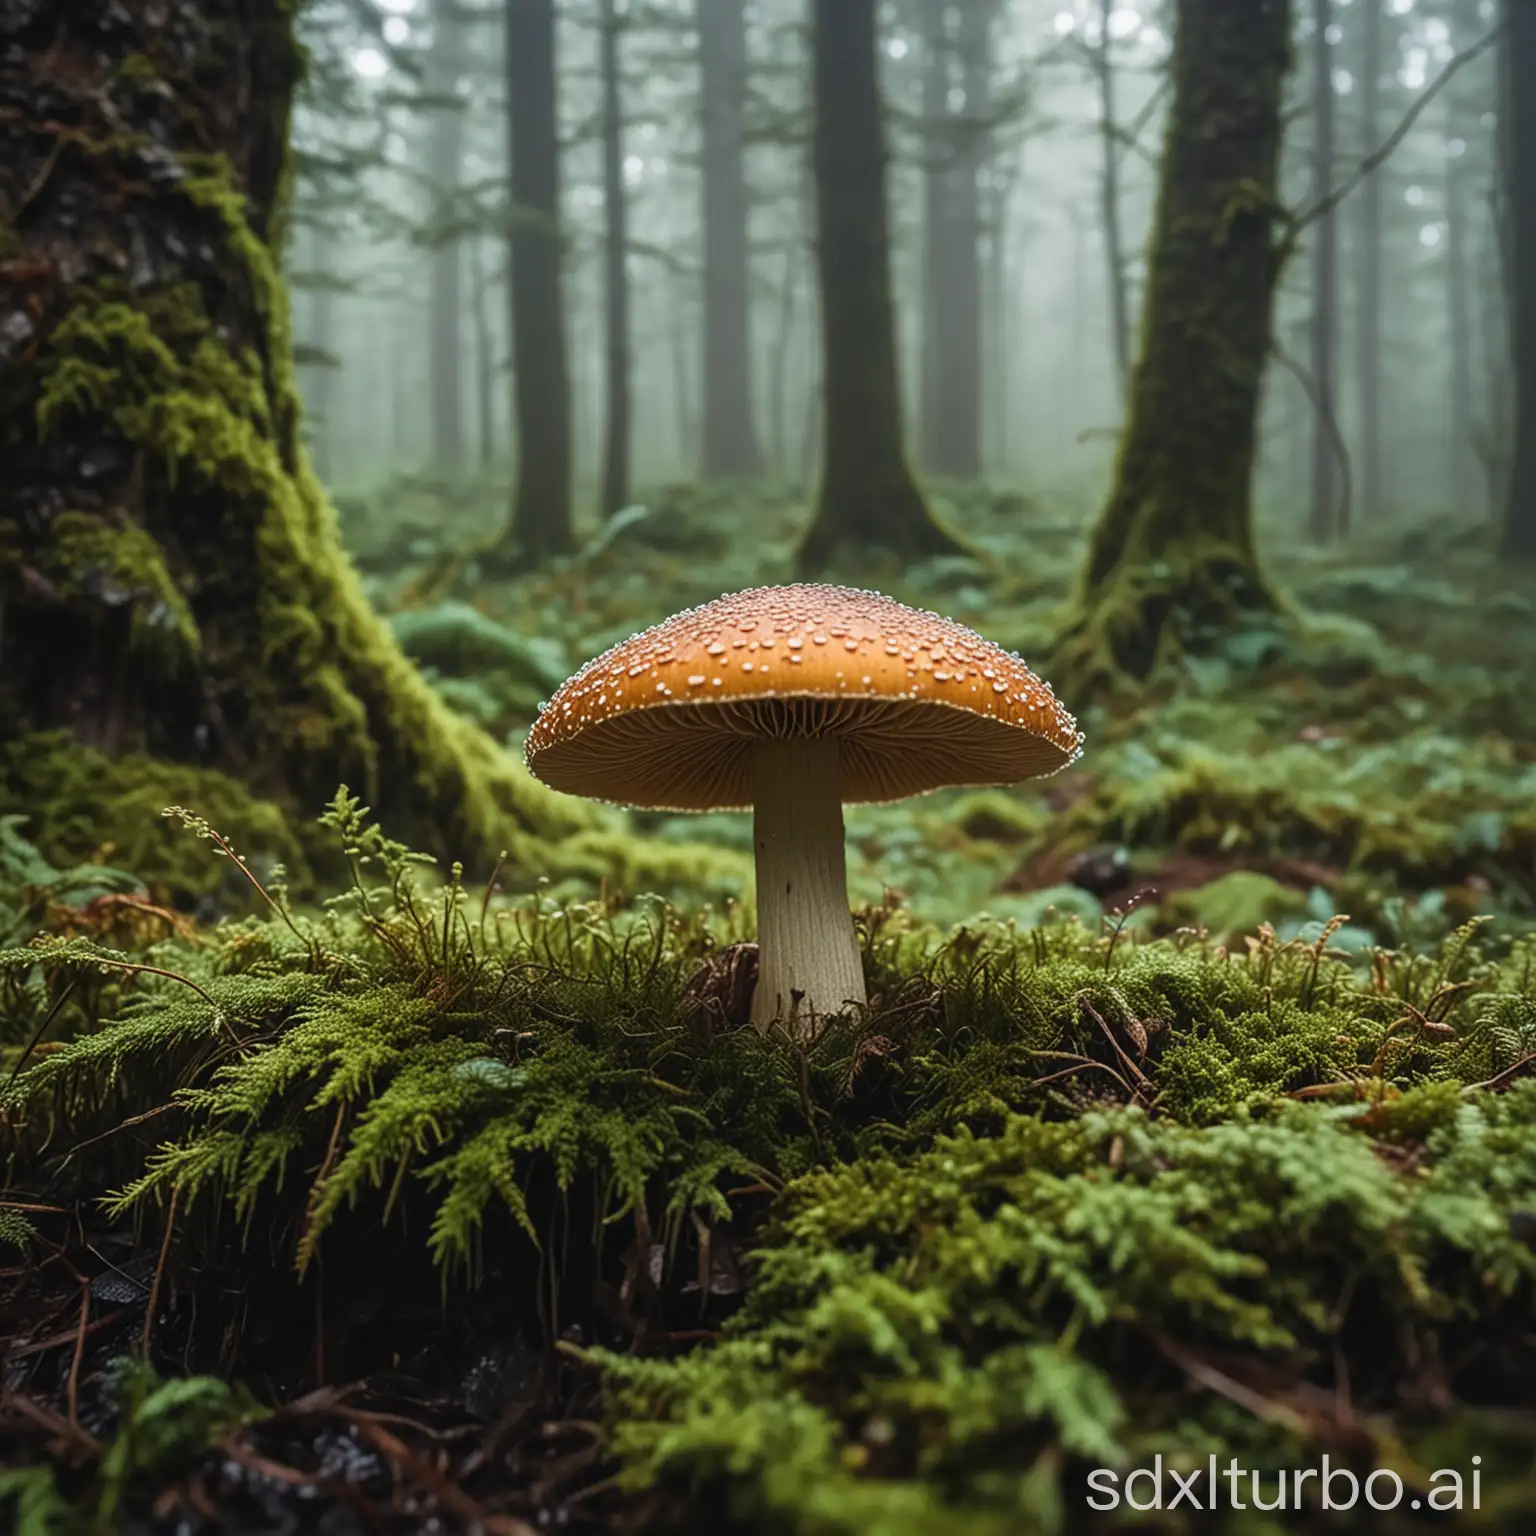 Enchanting shot of a fairytale-like mushroom ring in a misty, moss-covered forest.